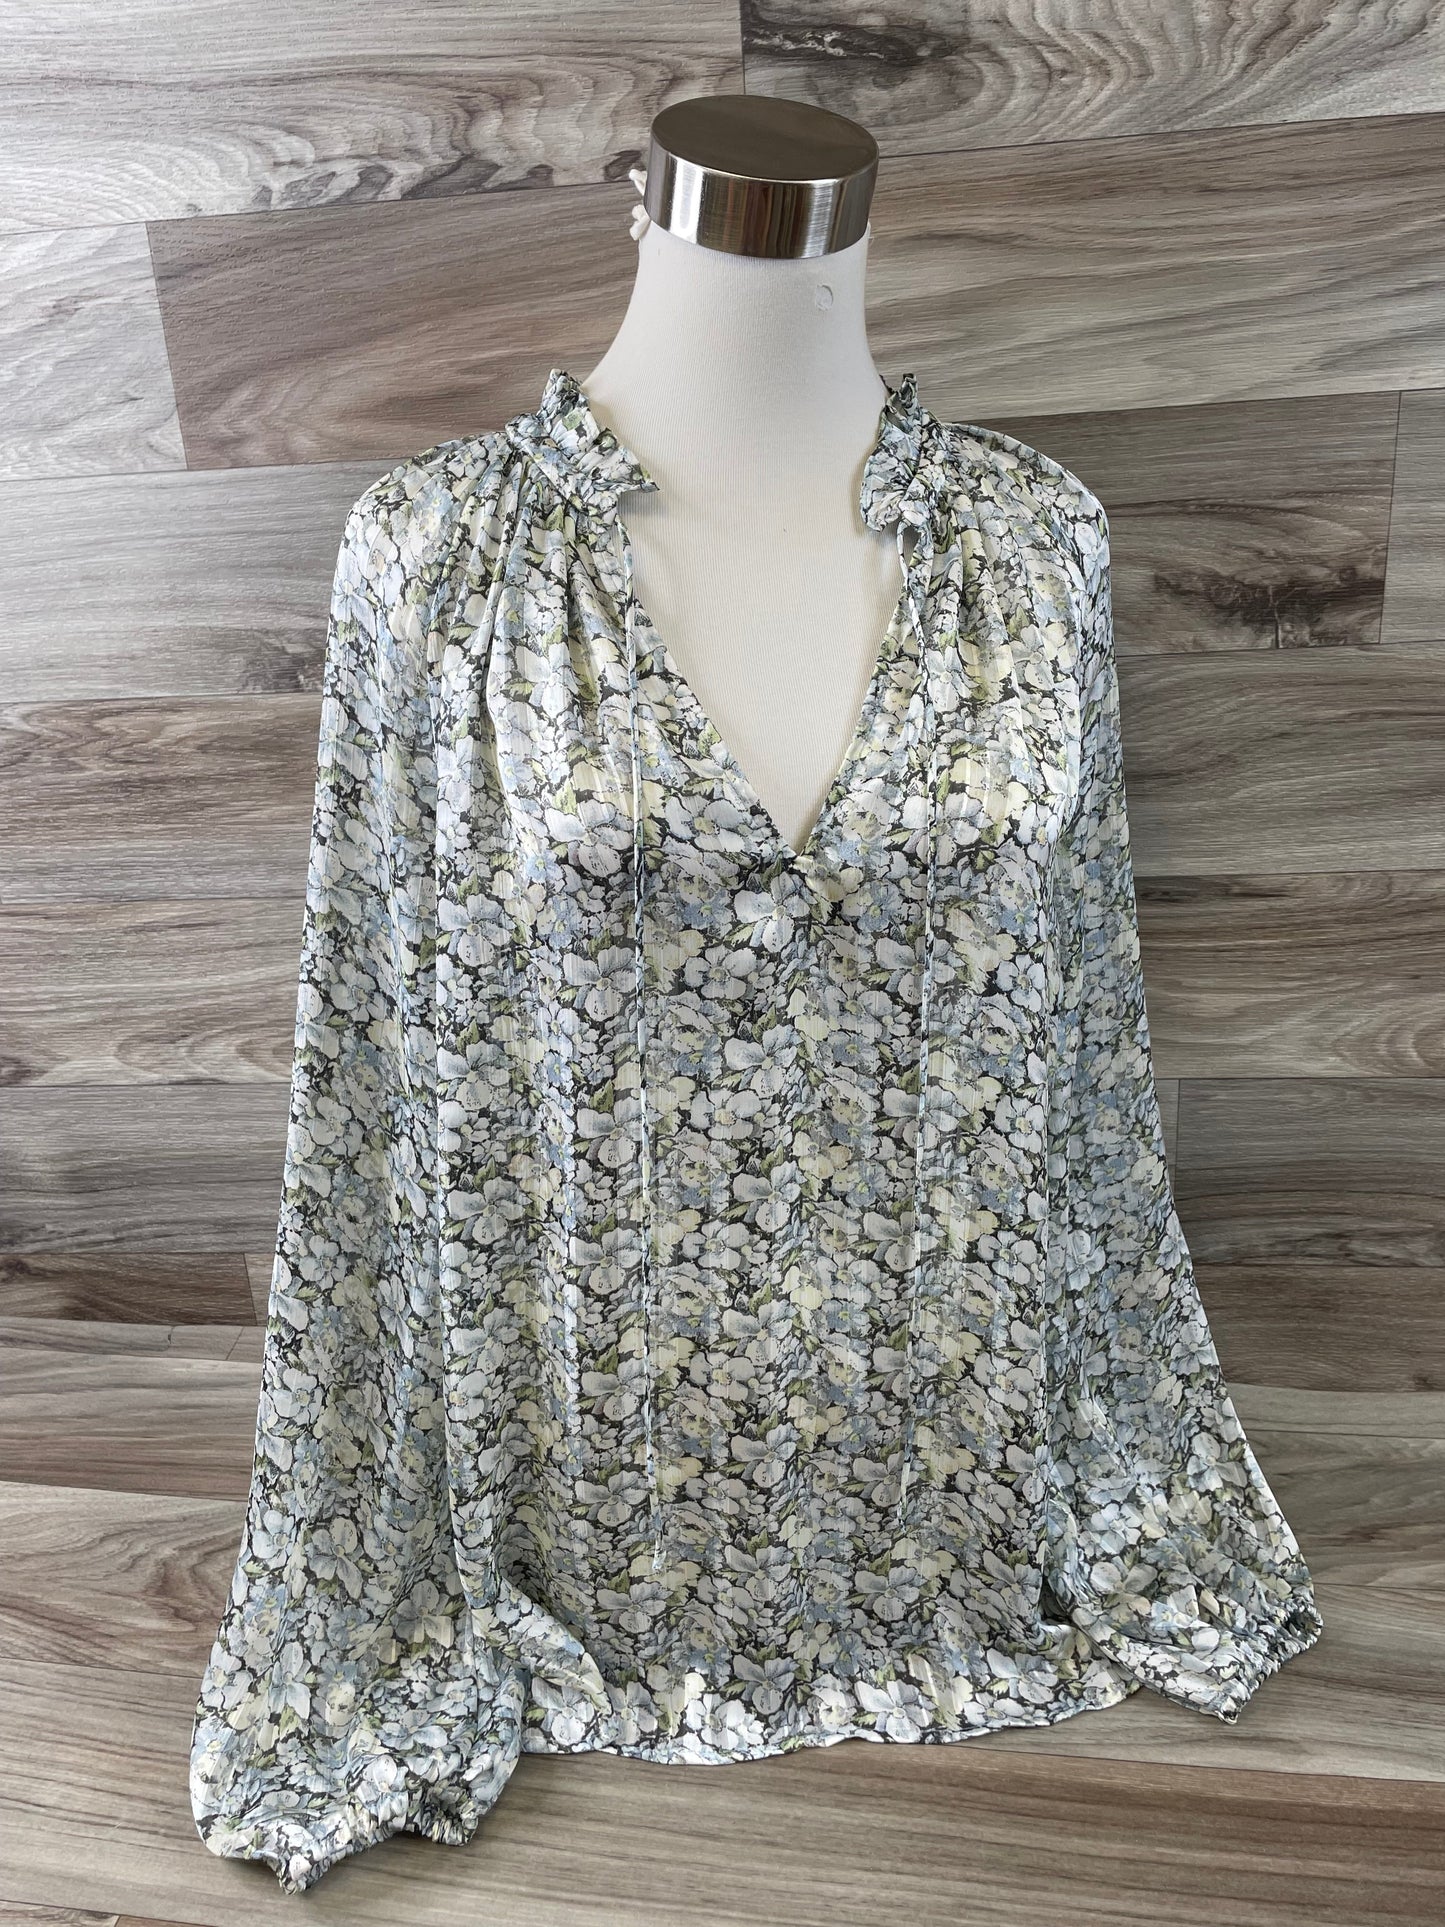 Blue & White Top Long Sleeve H&m, Size M